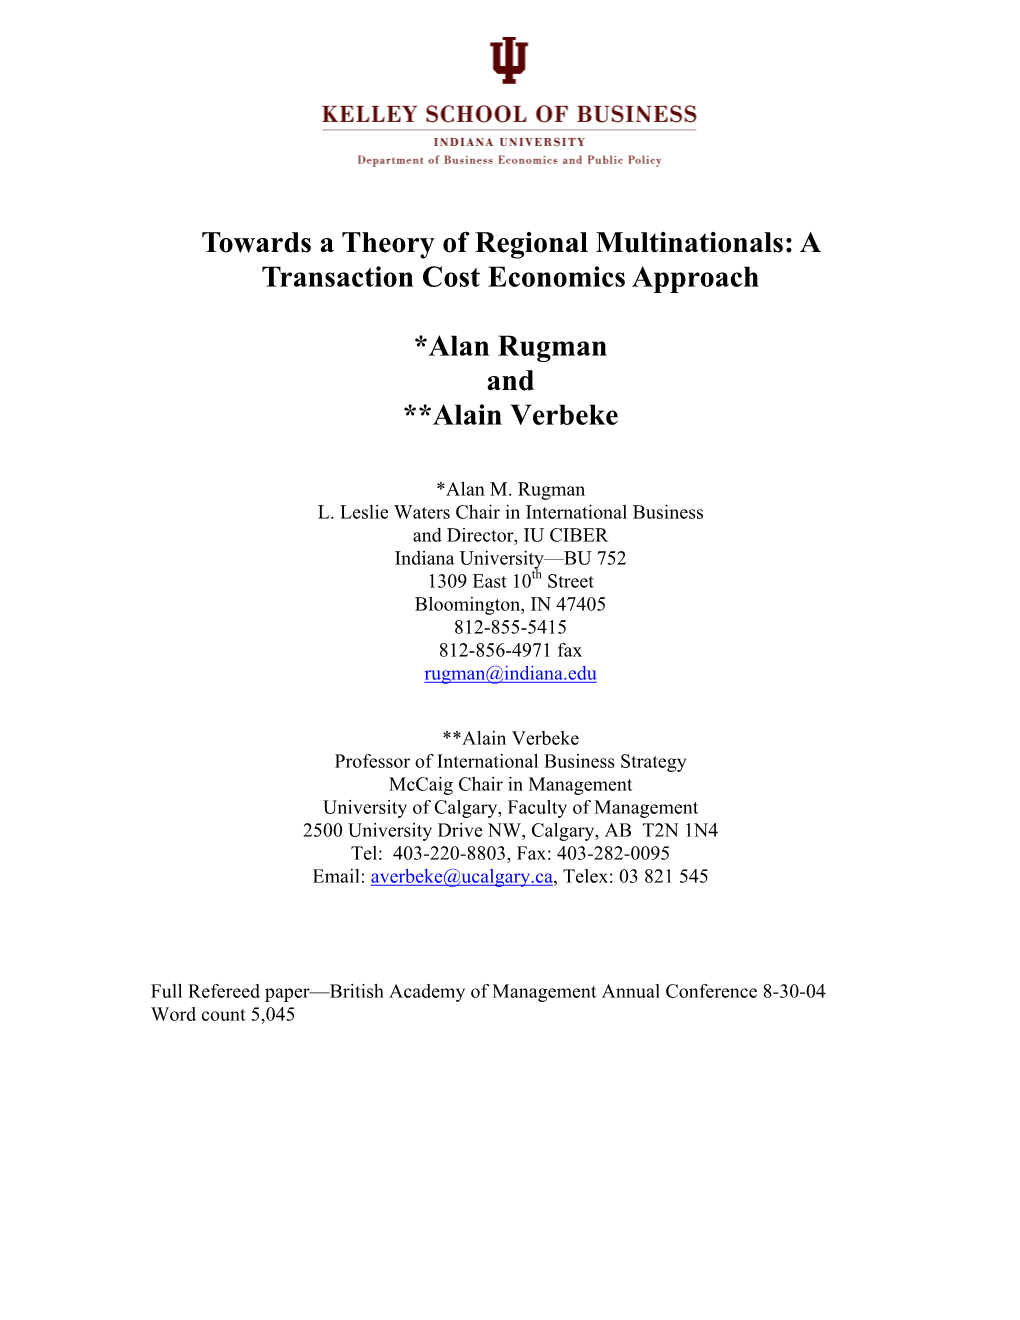 Towards a Theory of Regional Multinationals: a Transaction Cost Economics Approach* Alan Rugman